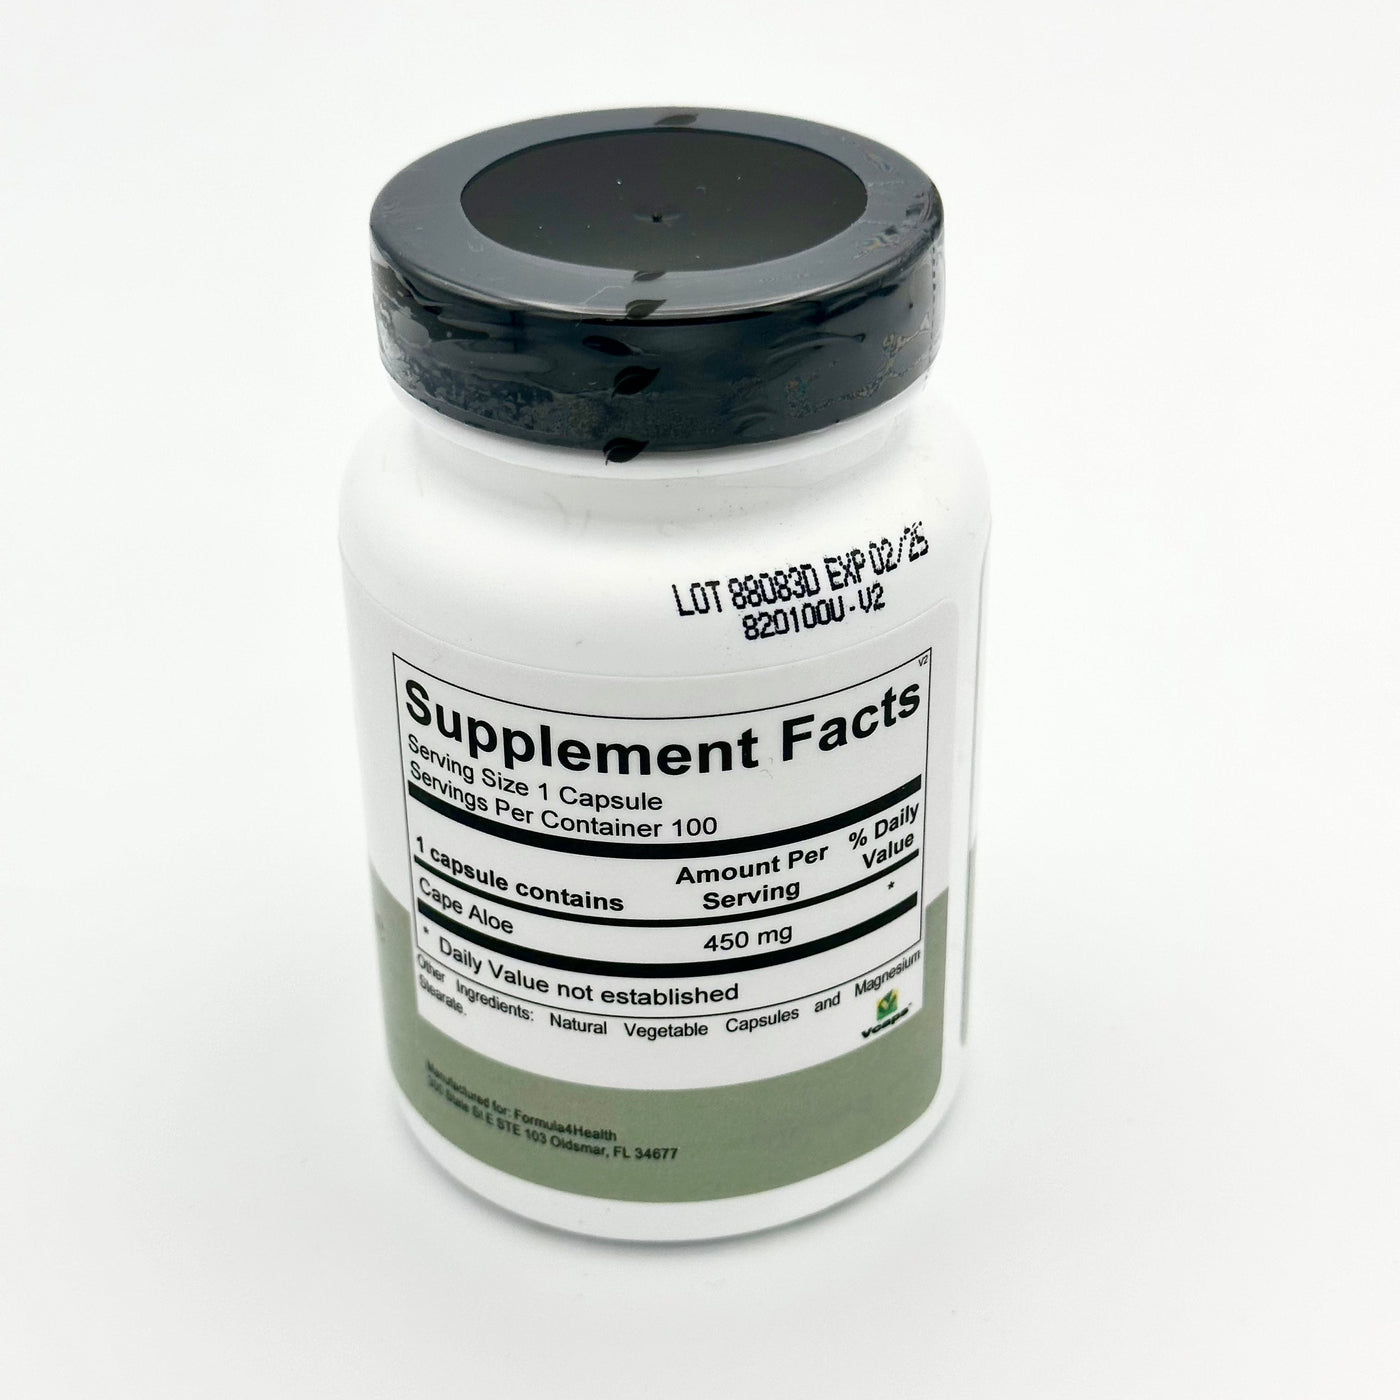 Cape Aloe Supreme by  Formula 4 Health. Available for online purchase at  Formula For Health.